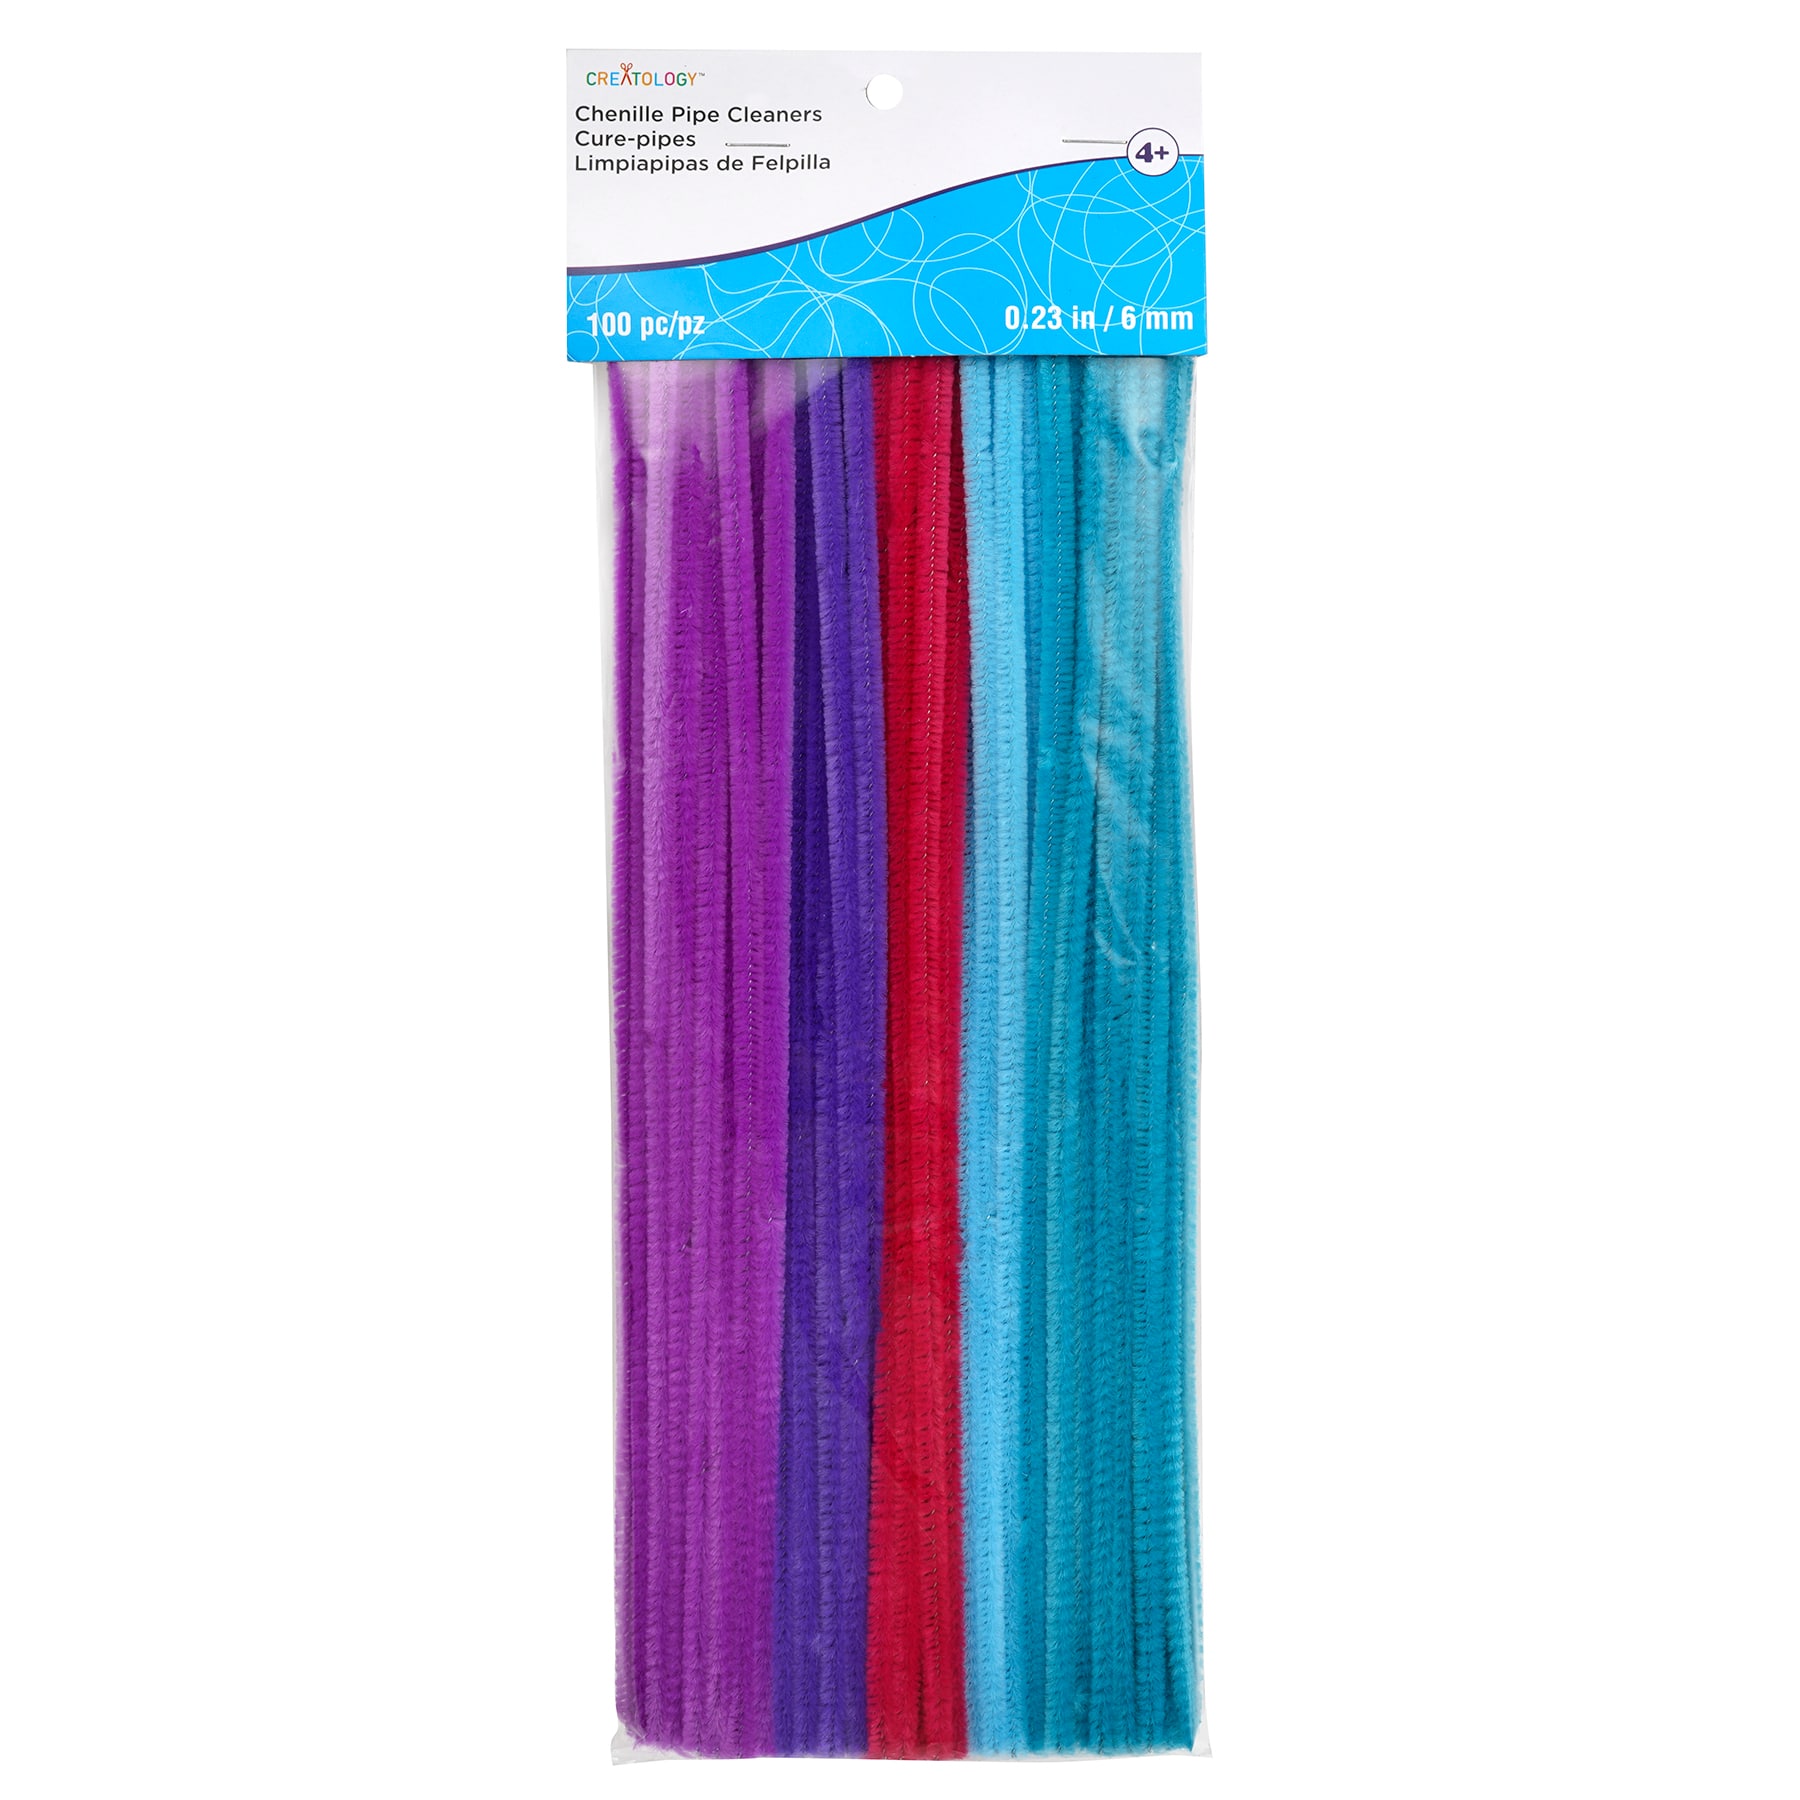 Creatology Chenille Pipe Cleaners - Purple - 0.23 x 12 in